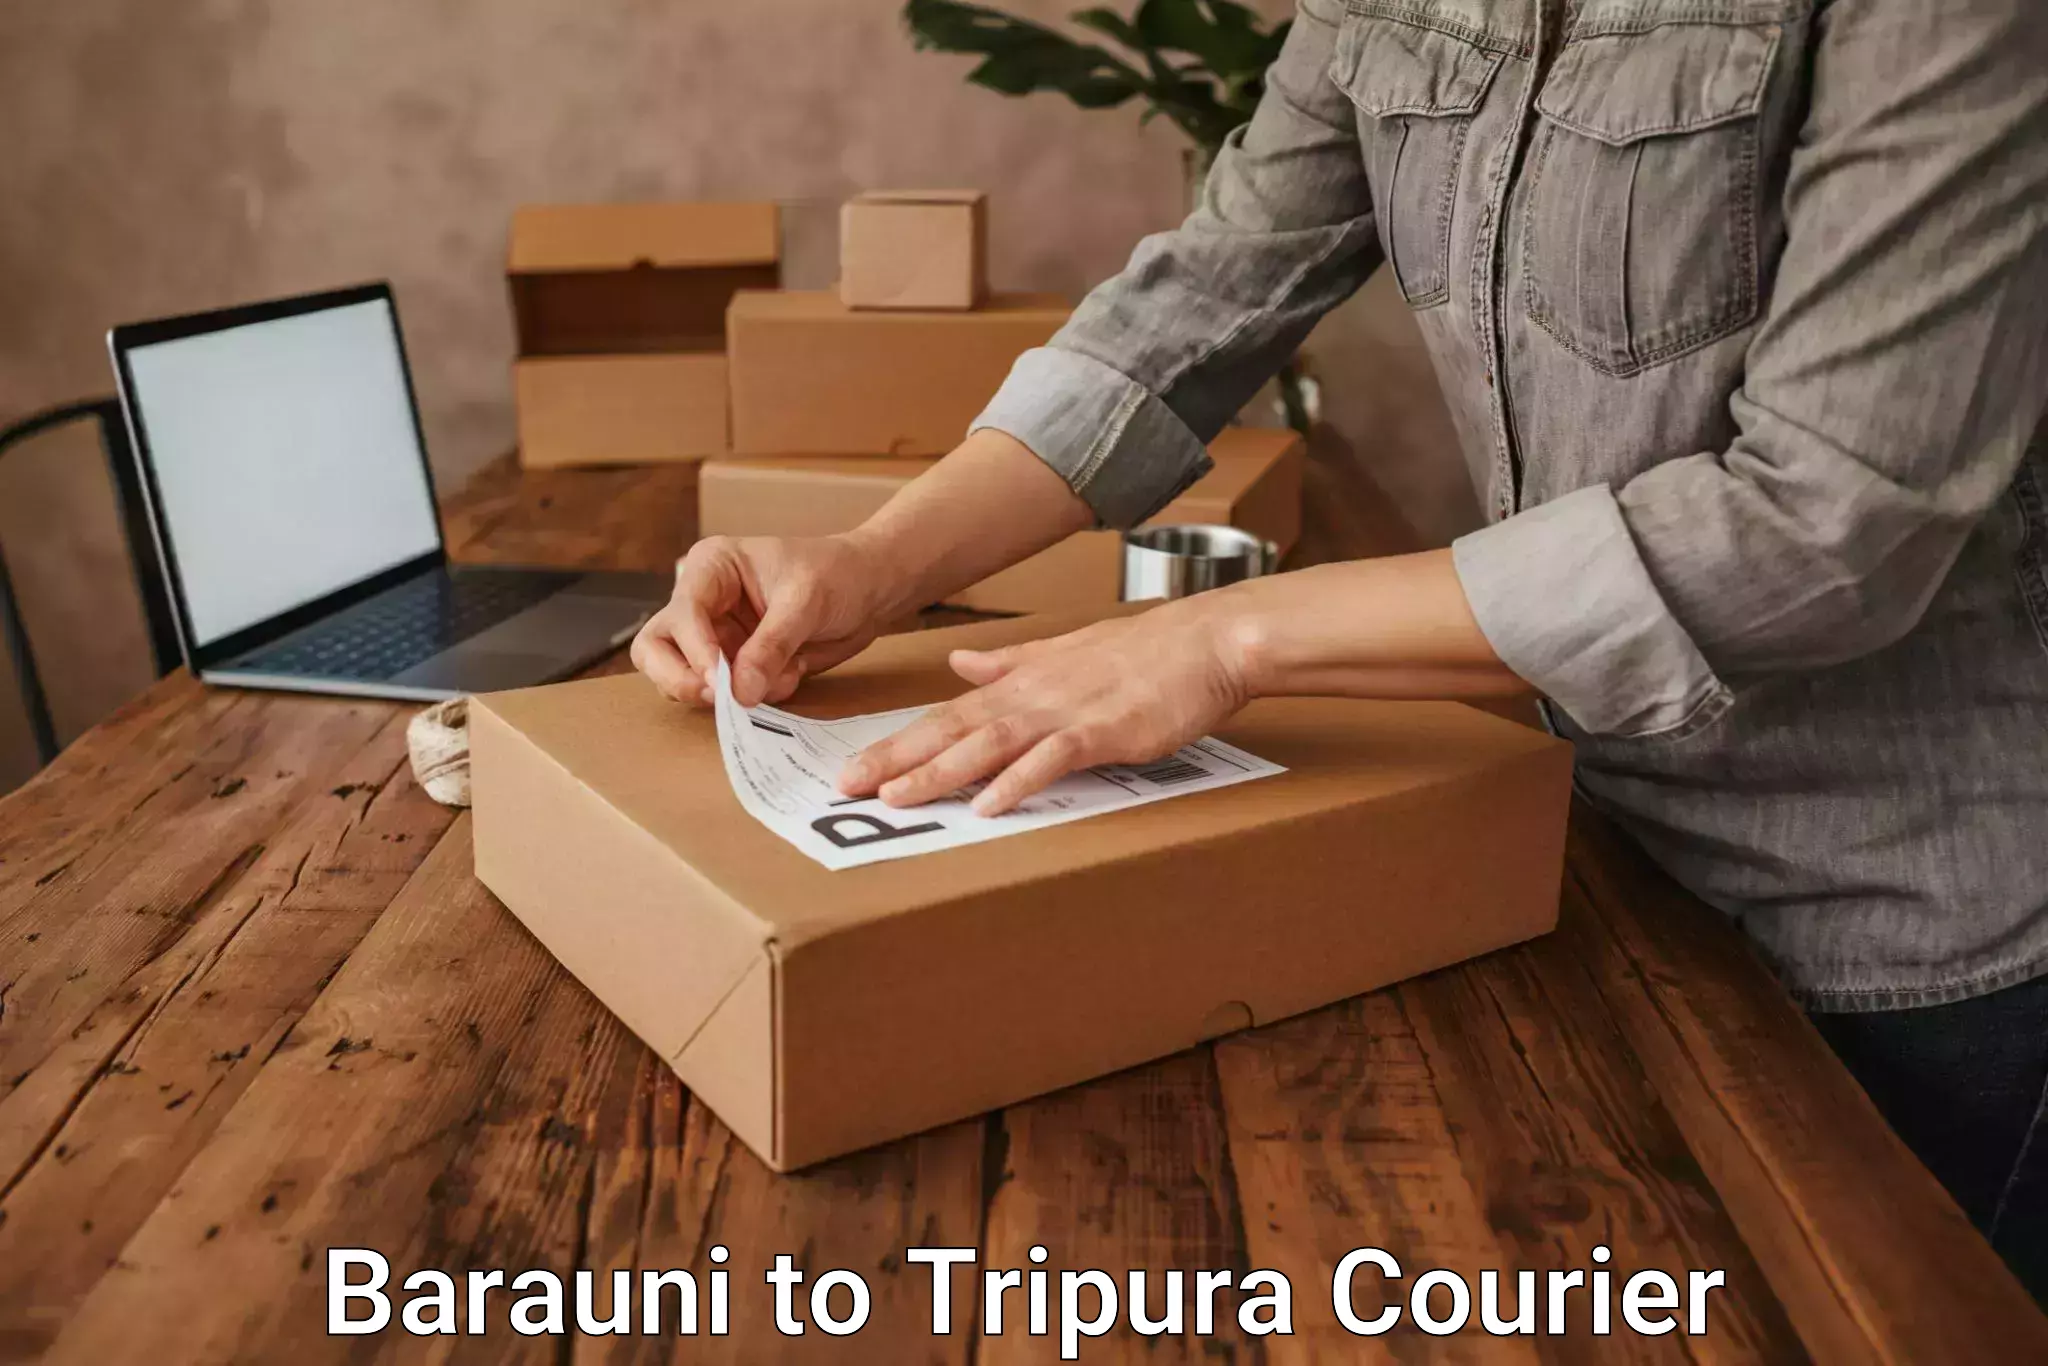 Trusted relocation experts in Barauni to Udaipur Tripura